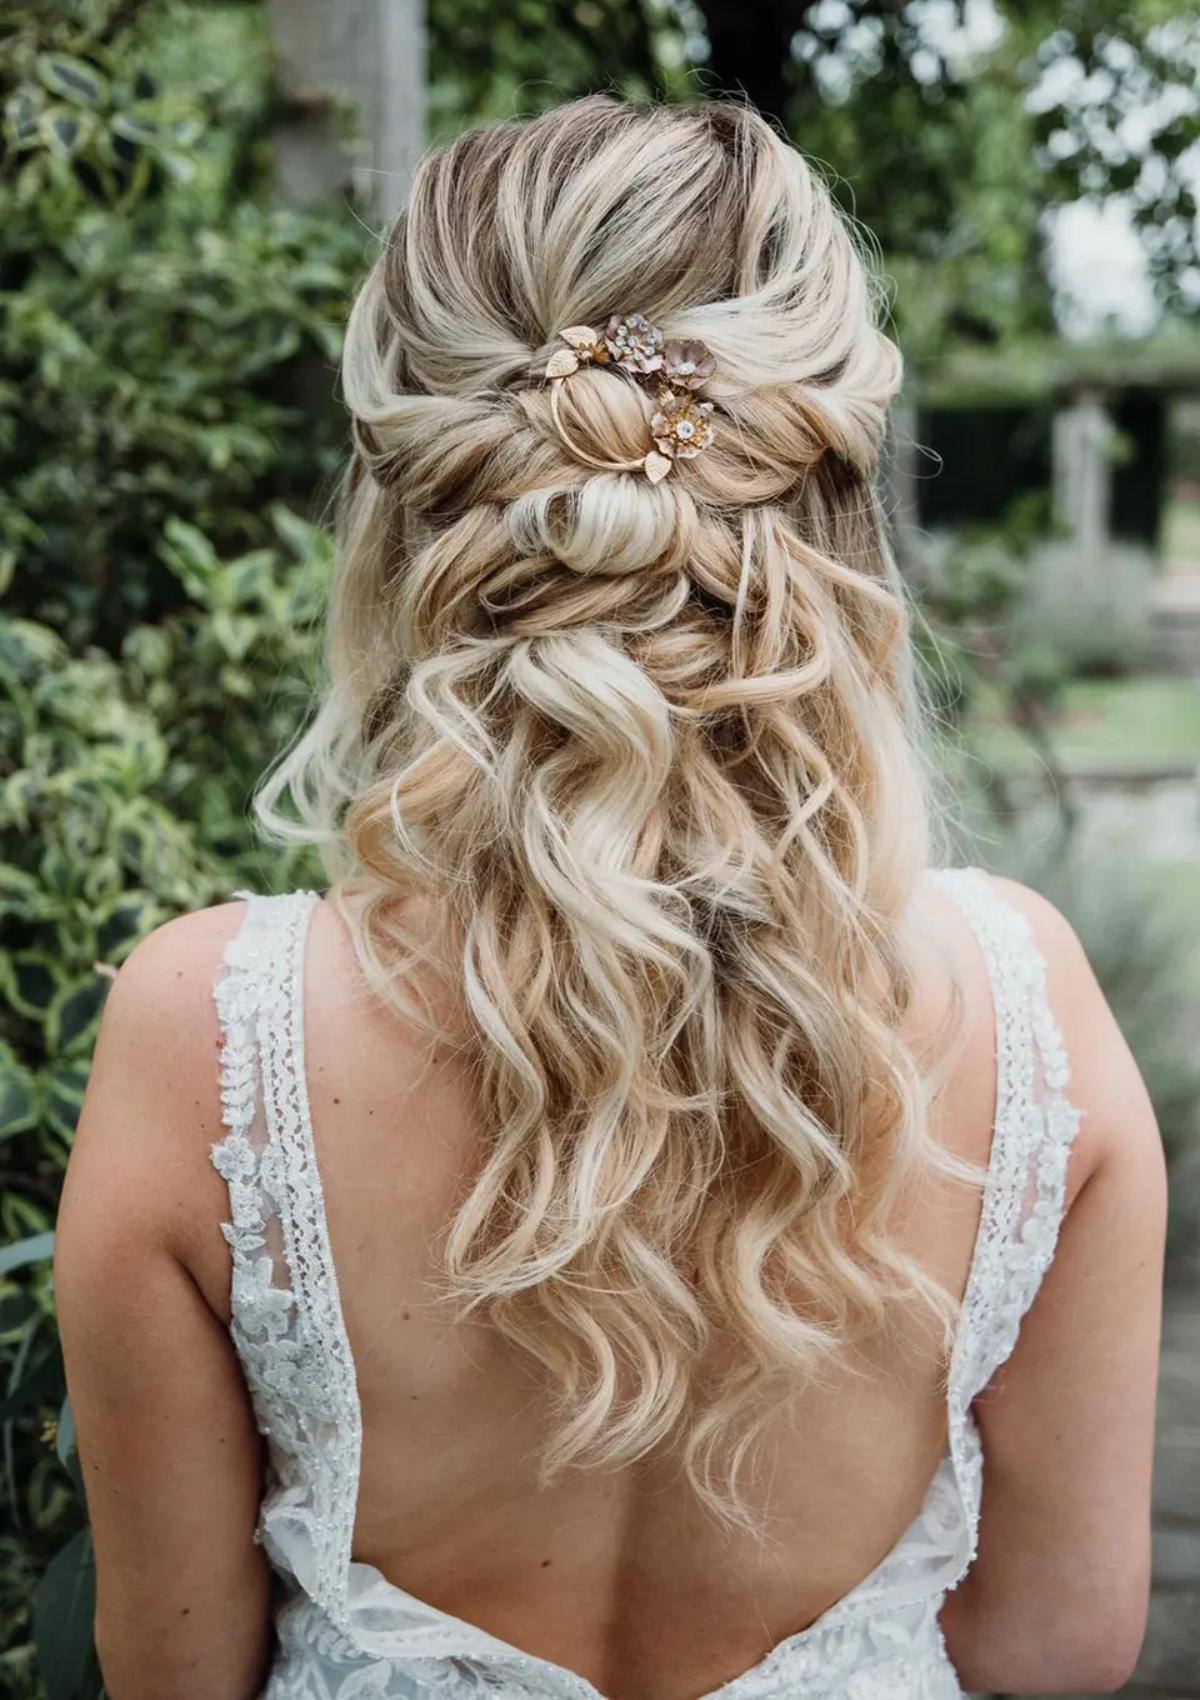 half-up, half-down hairstyles for any occasion | by Tiffany | Medium